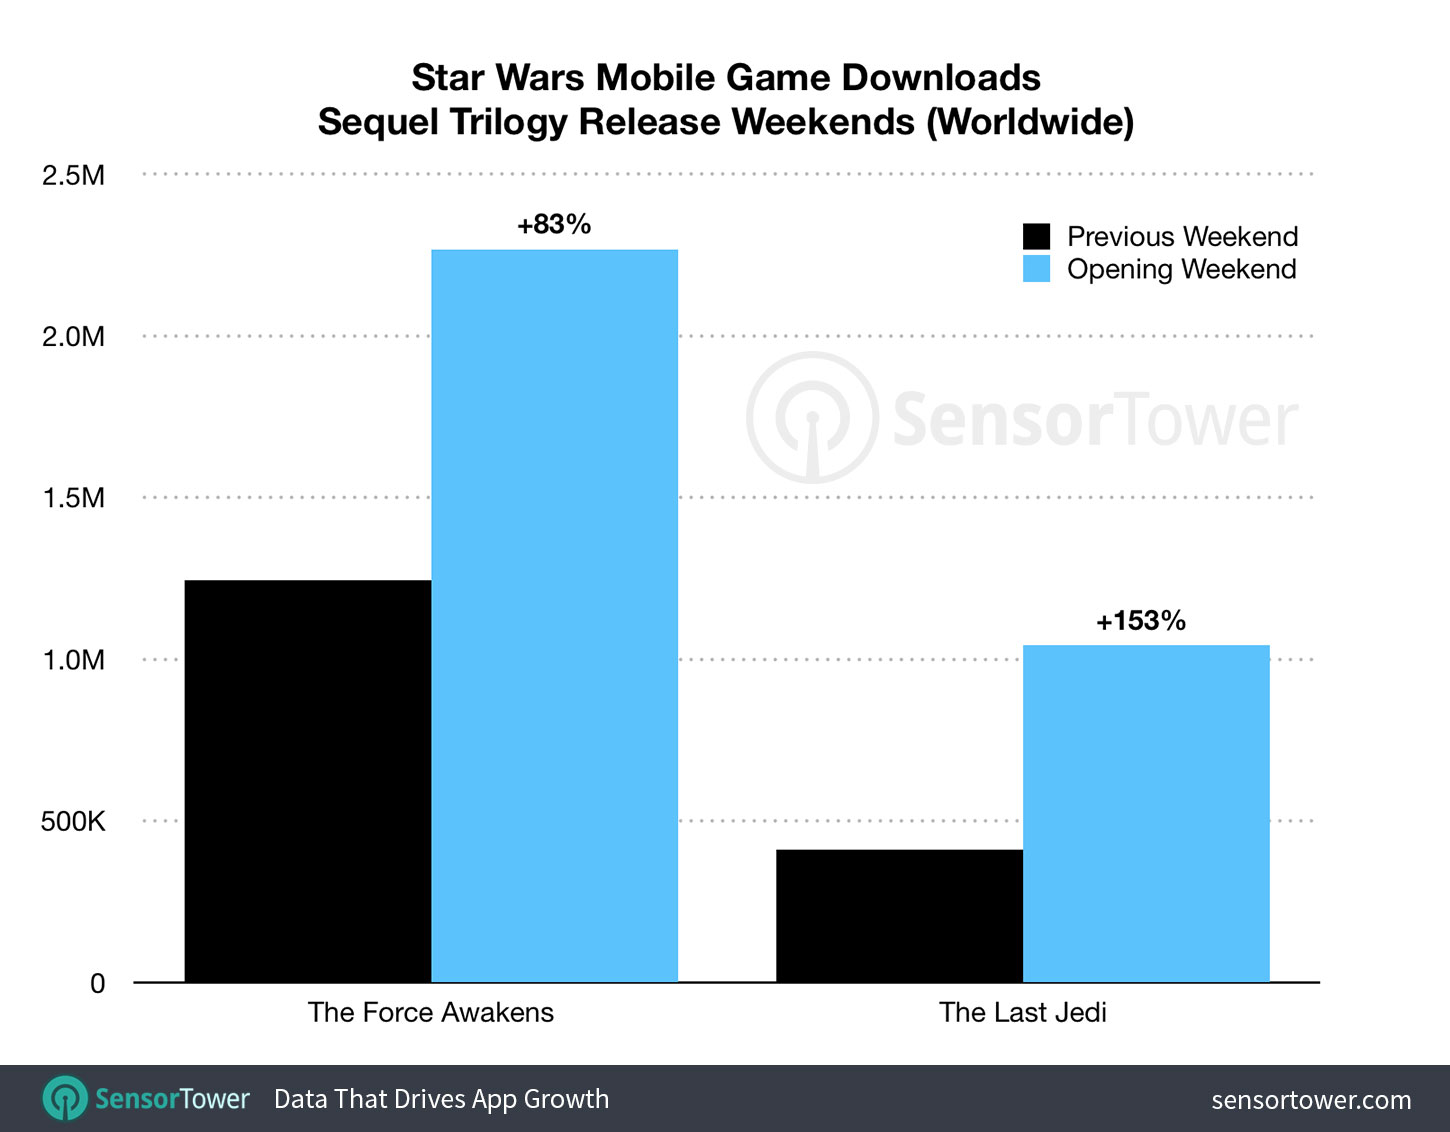 Chart comparing Star Wars mobile game installs for the release weekend on The Last Jedi vs. The Force Awakens